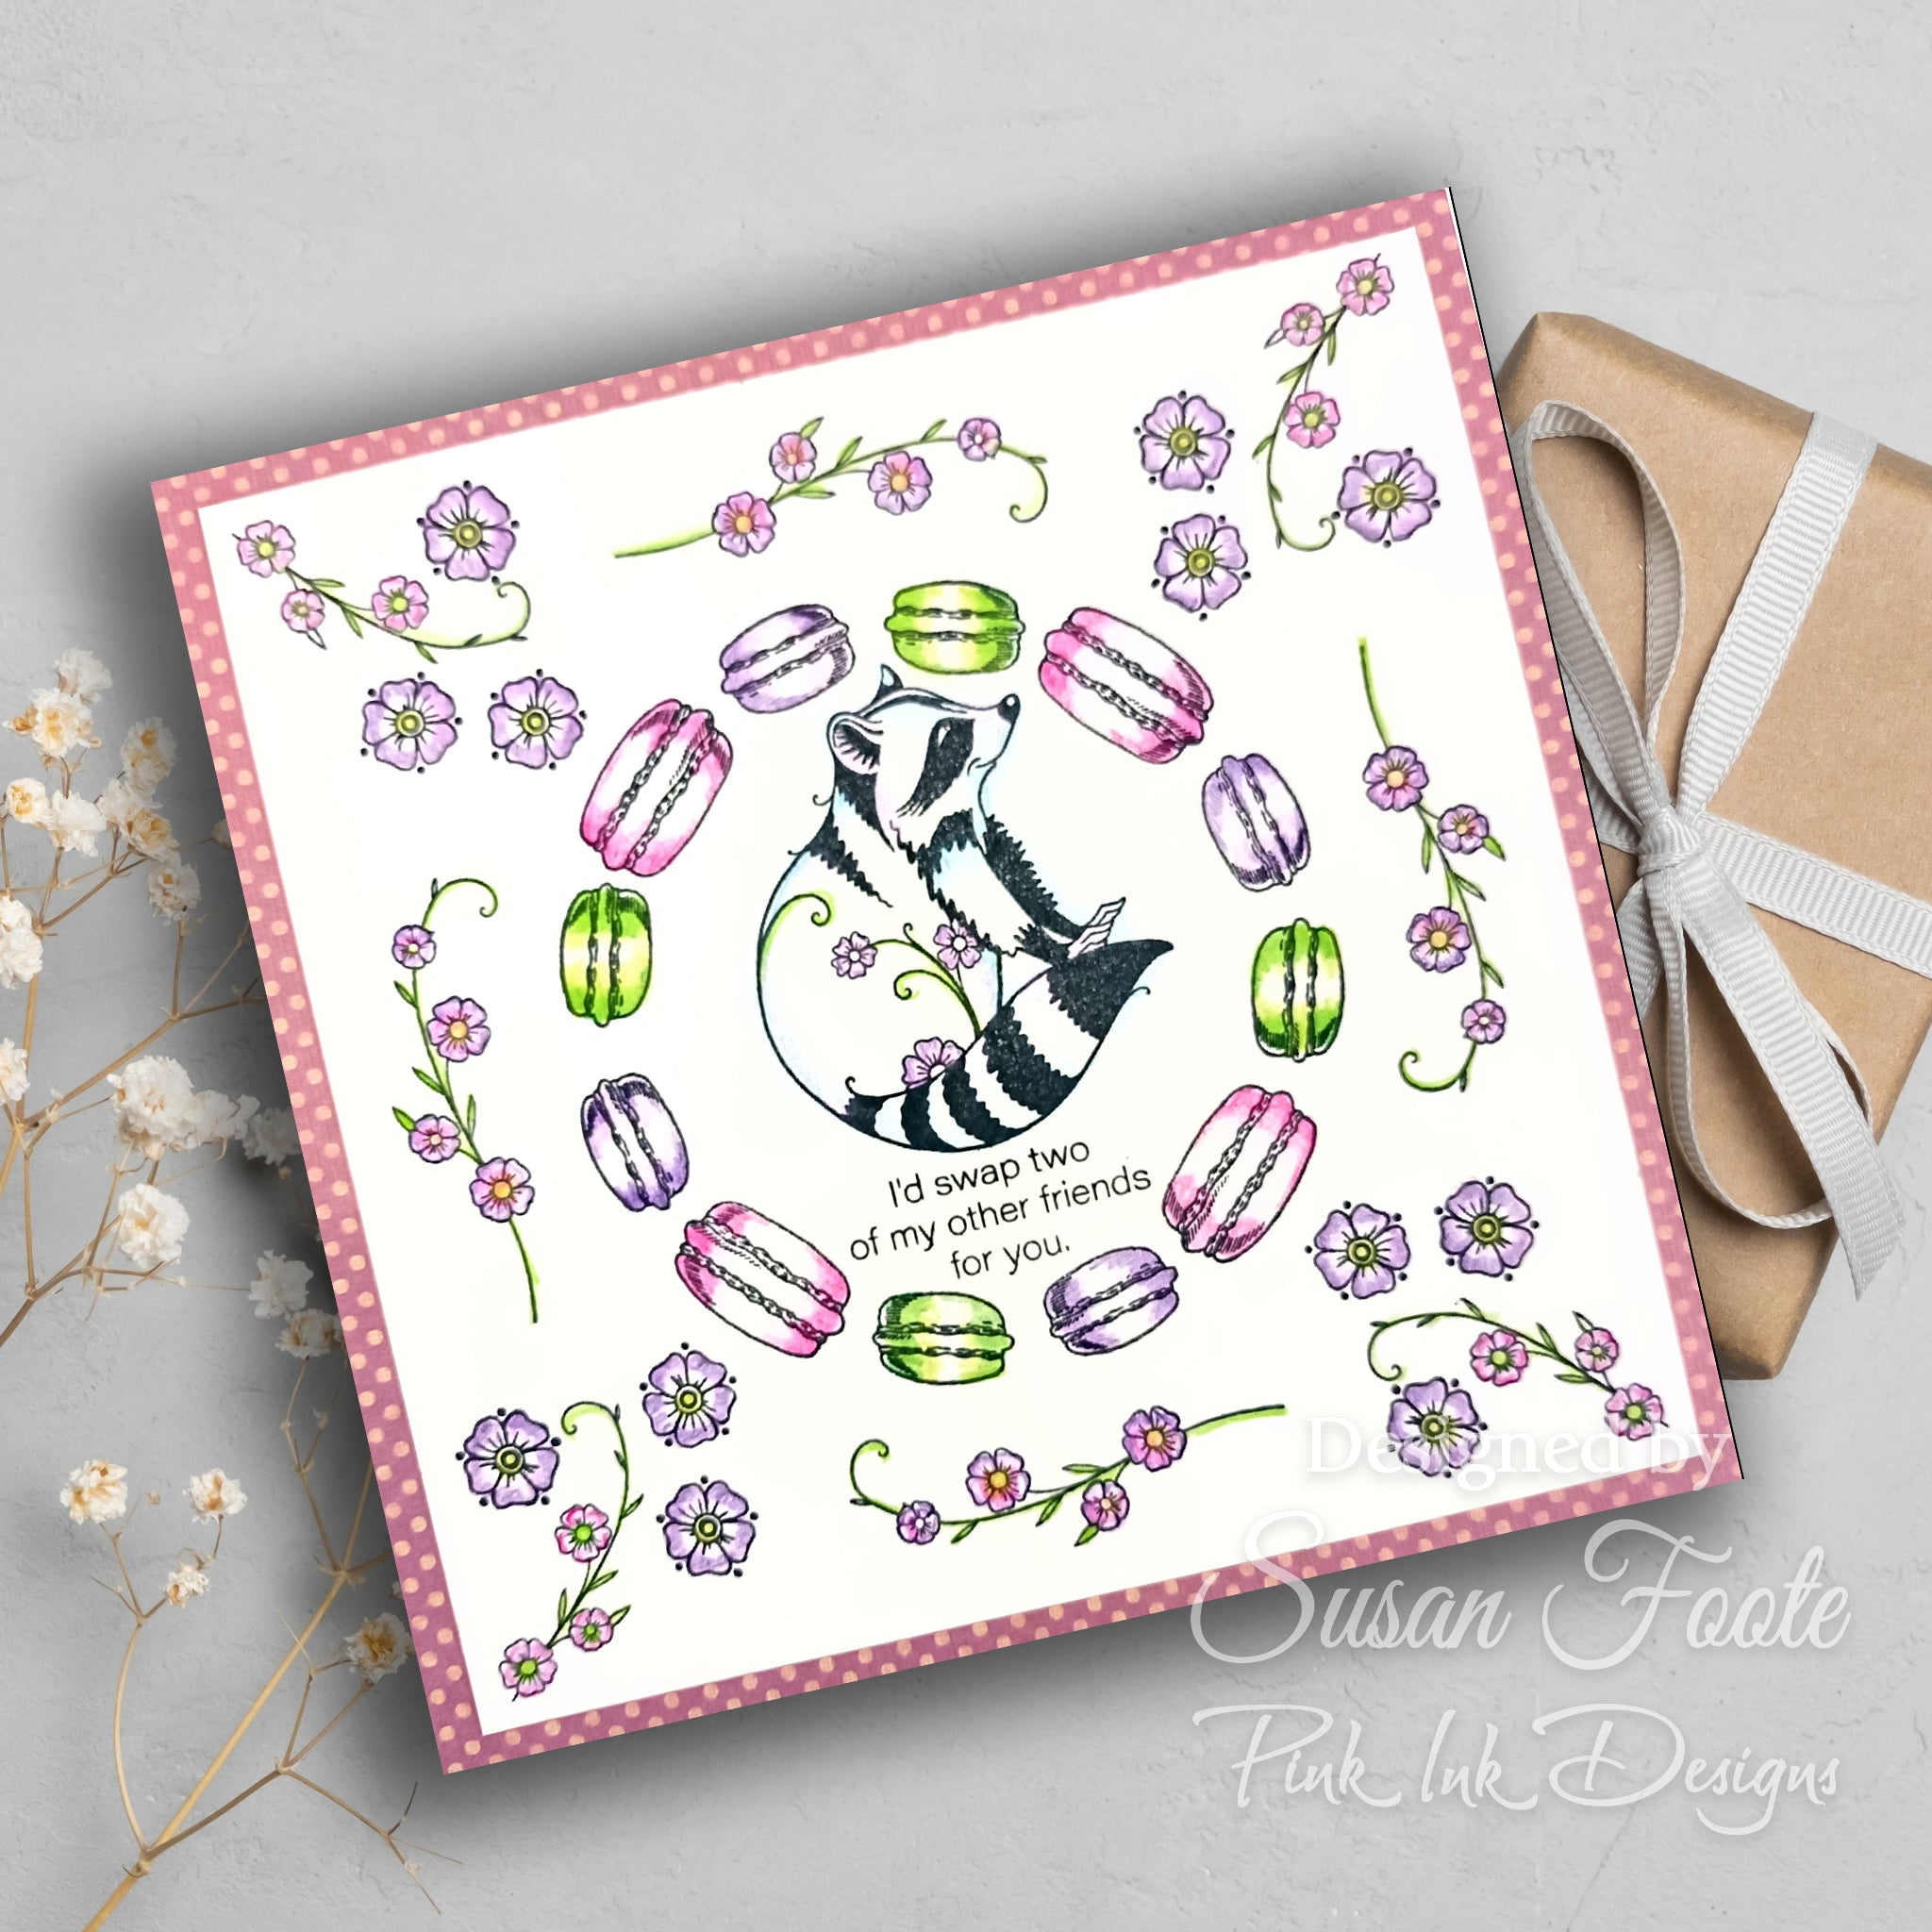 Pink Ink Designs Macaroon Racoon 6 in x 8 in Clear Stamp Set